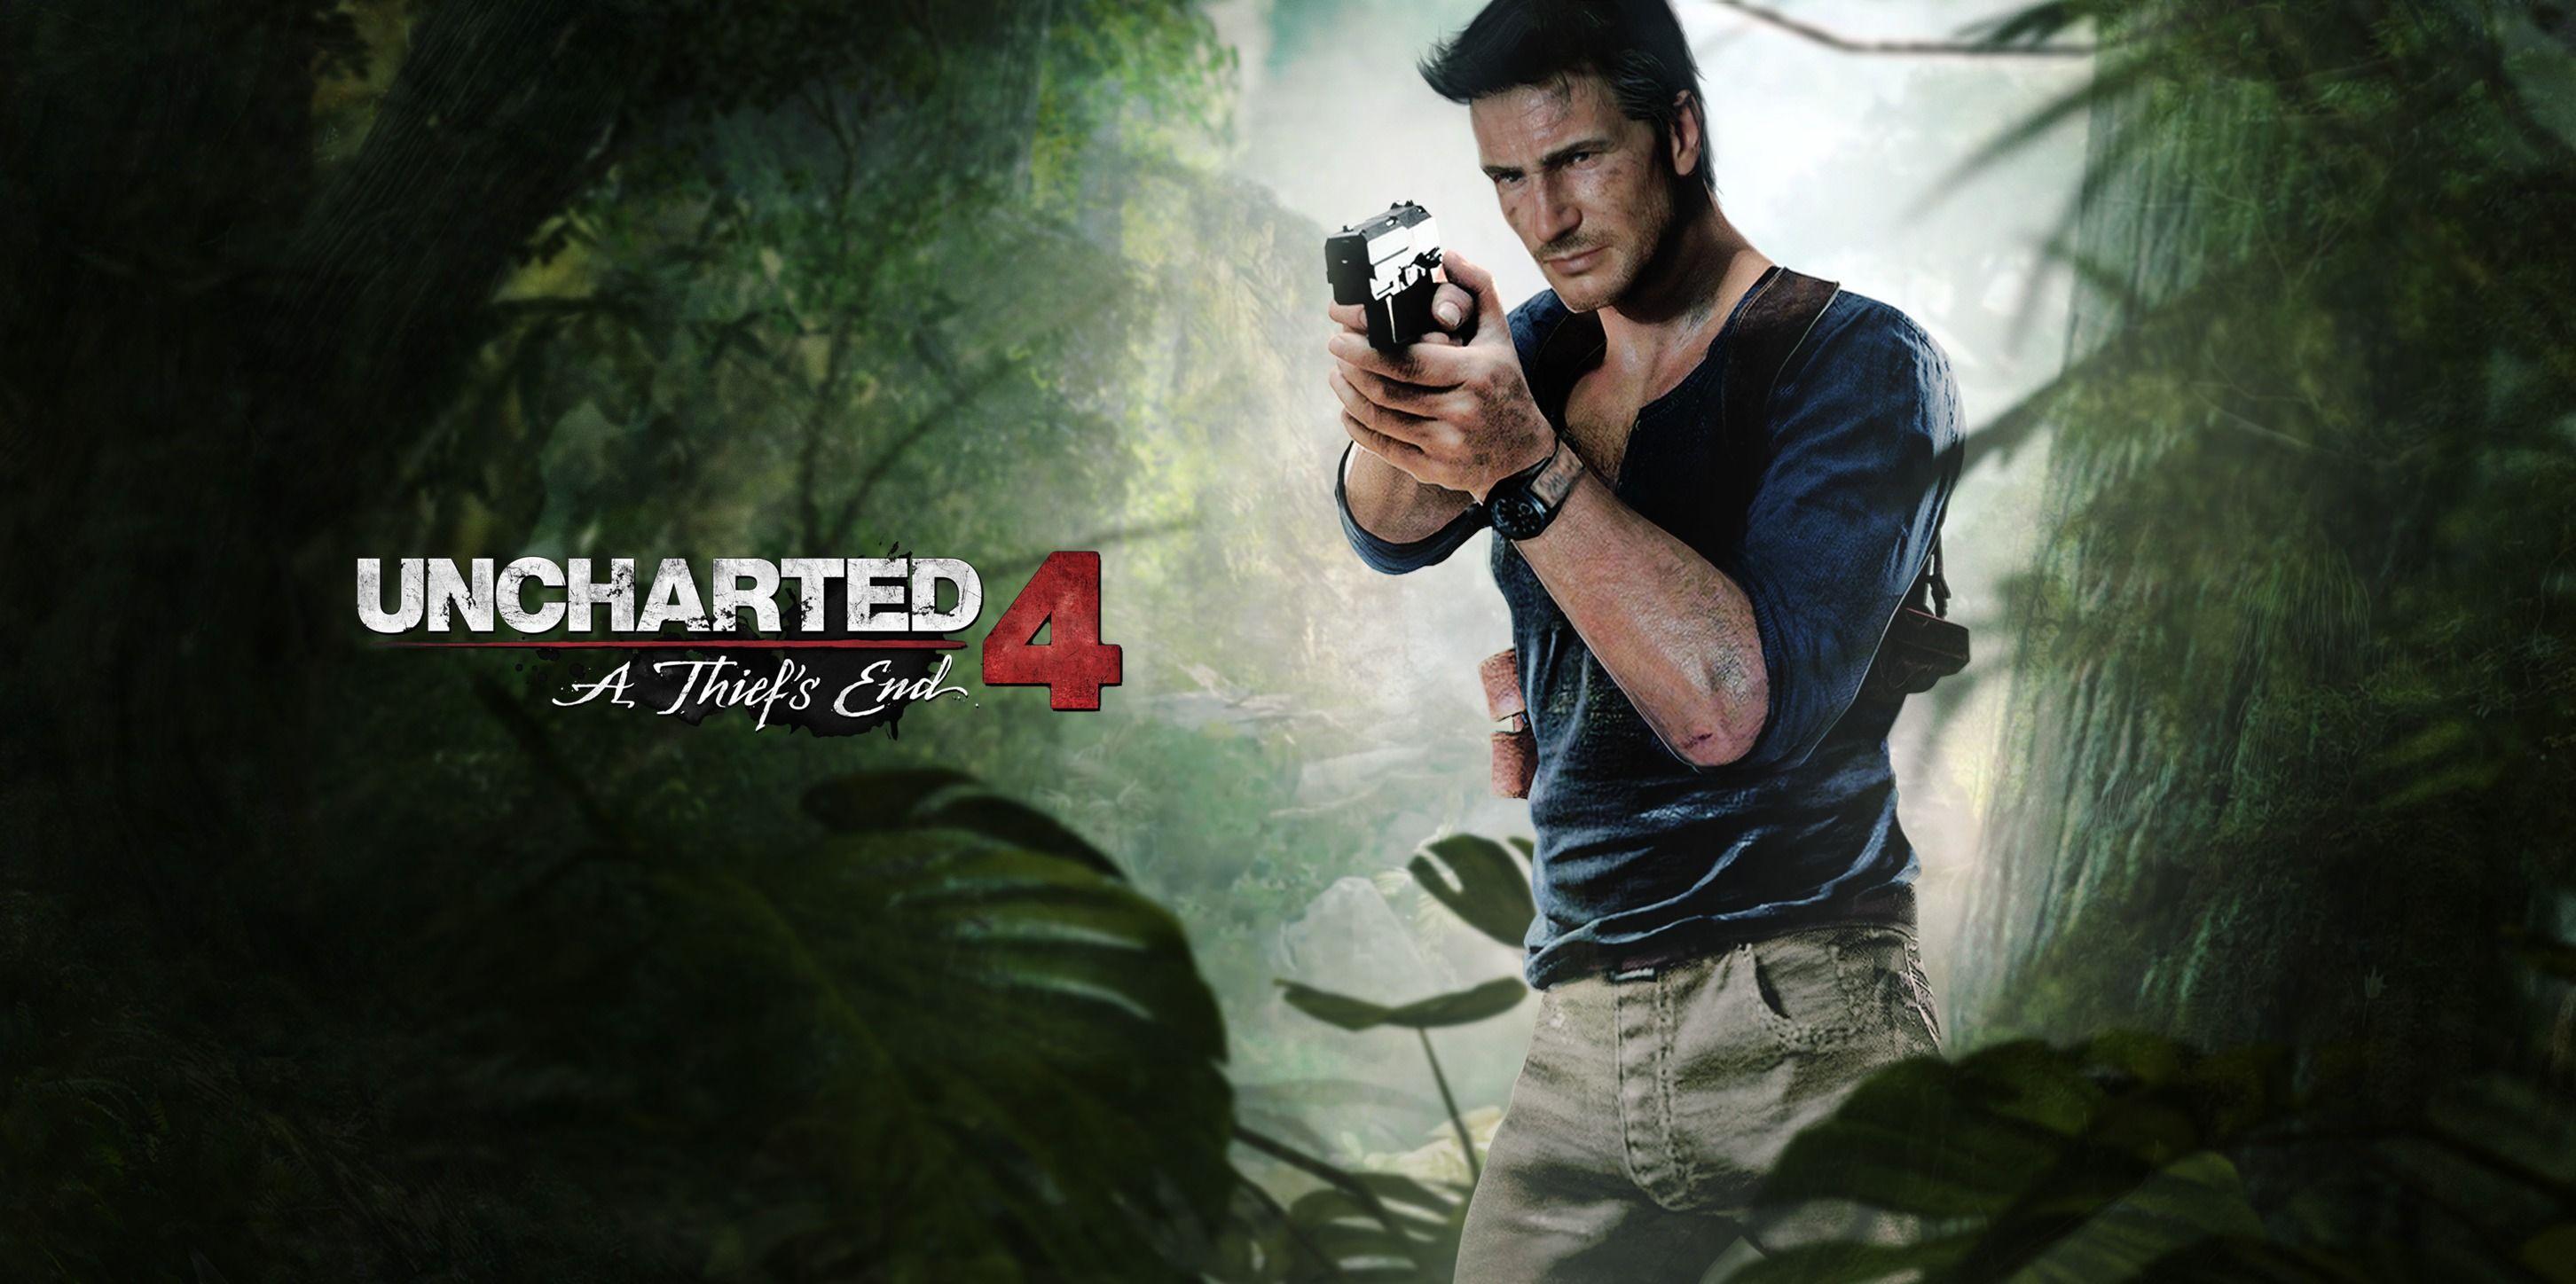 Uncharted 4: A Thief&;s End HD Wallpaper and screens download free